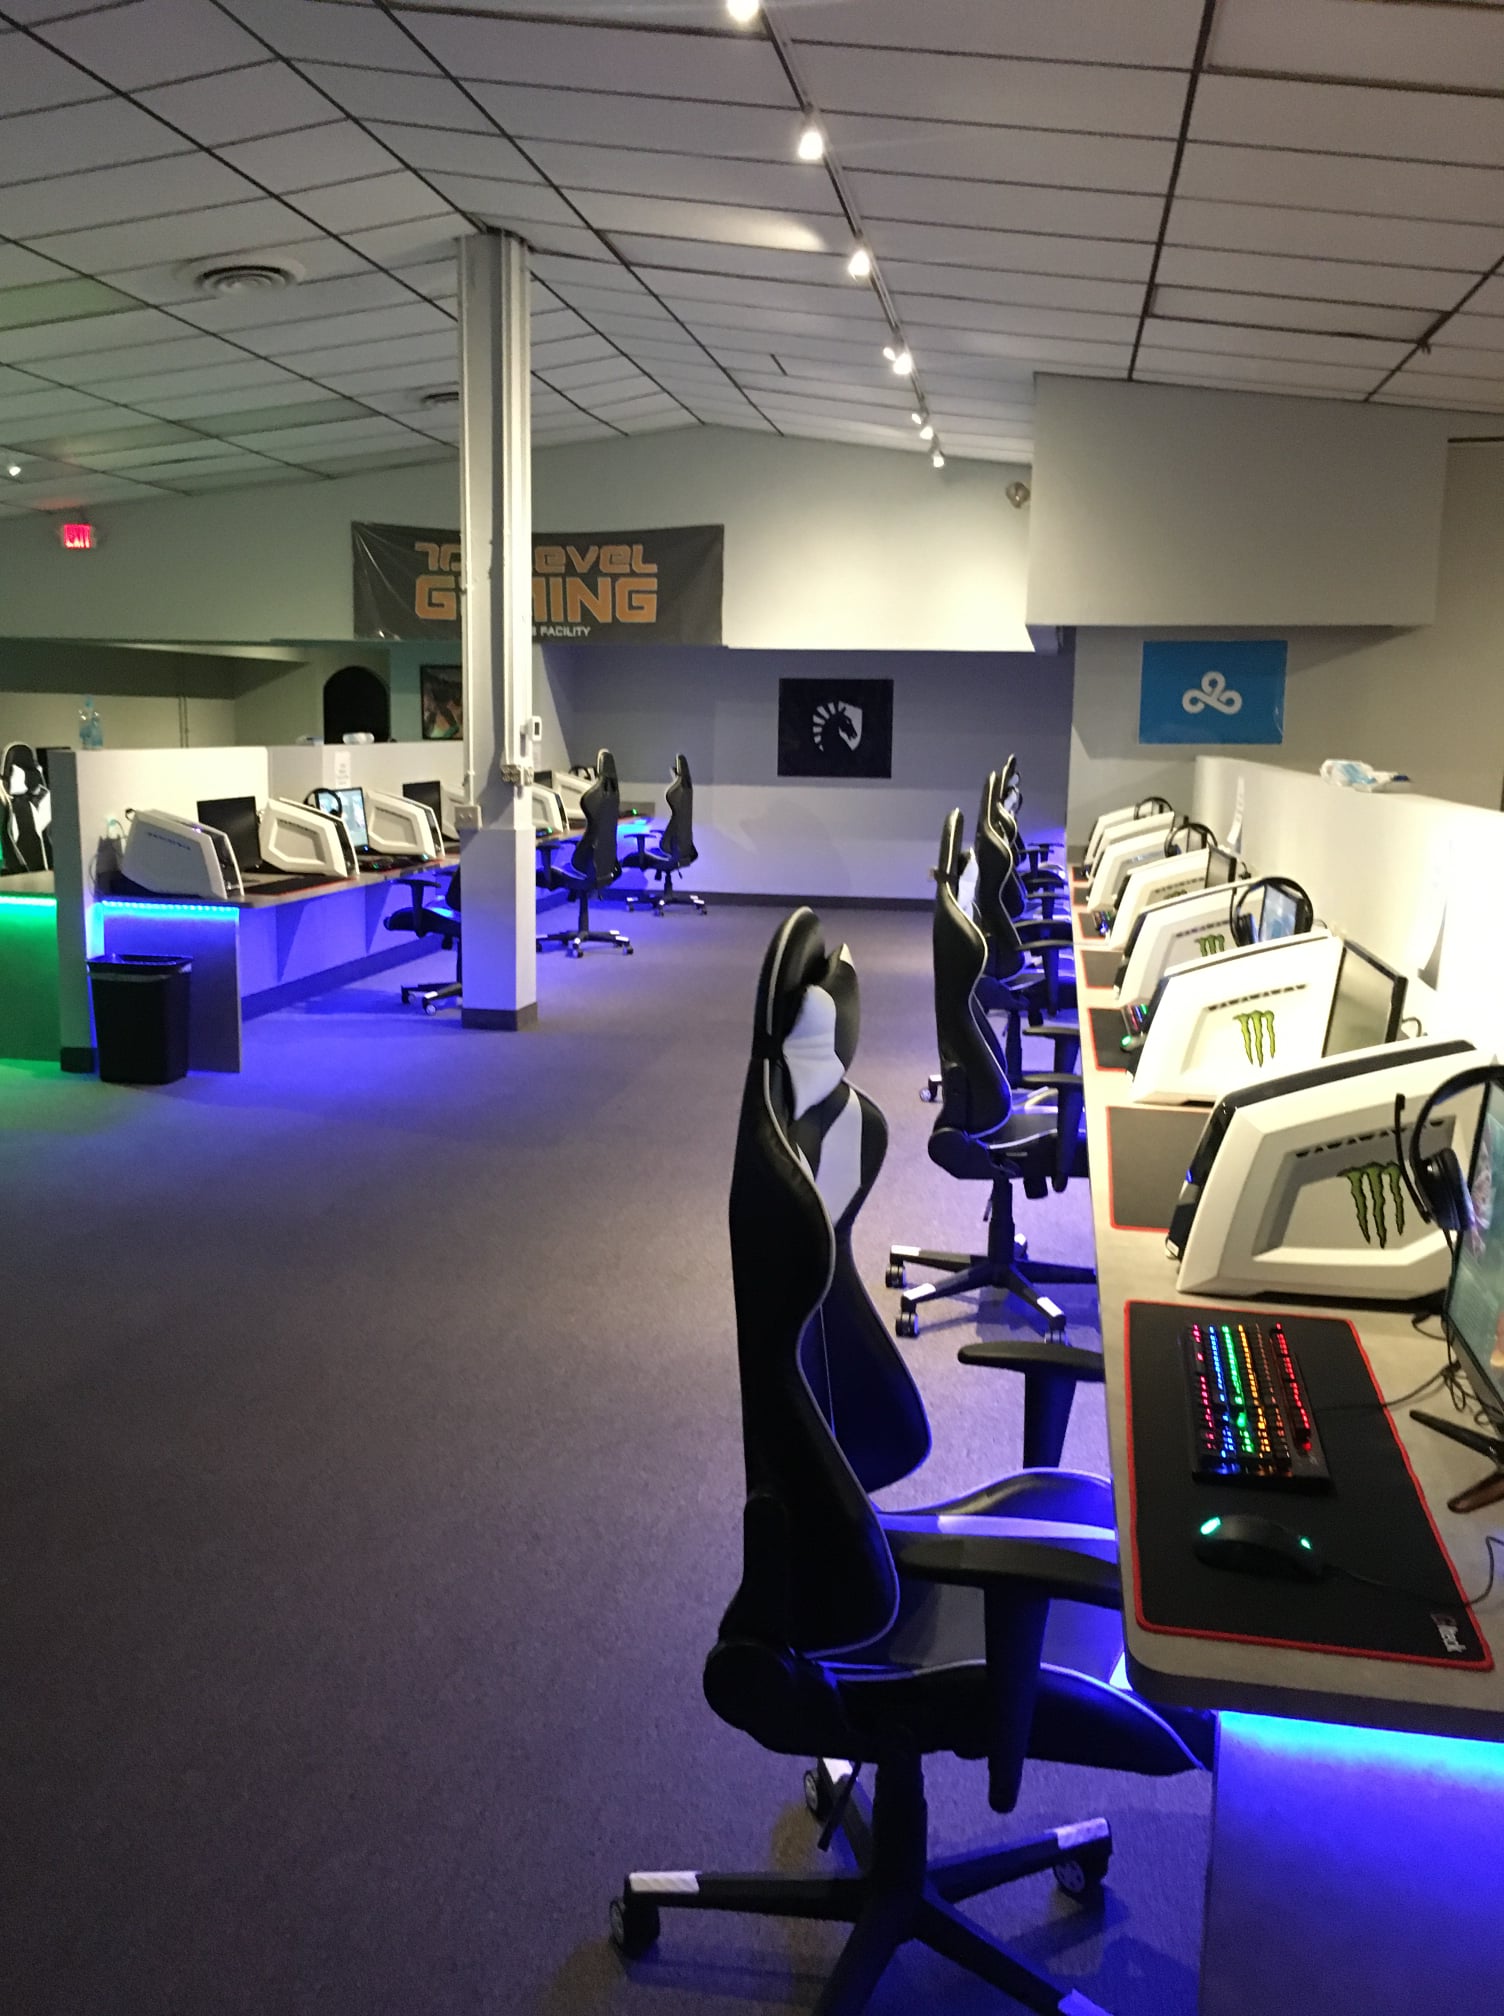 Top Level Gaming has a place for esports fans and community